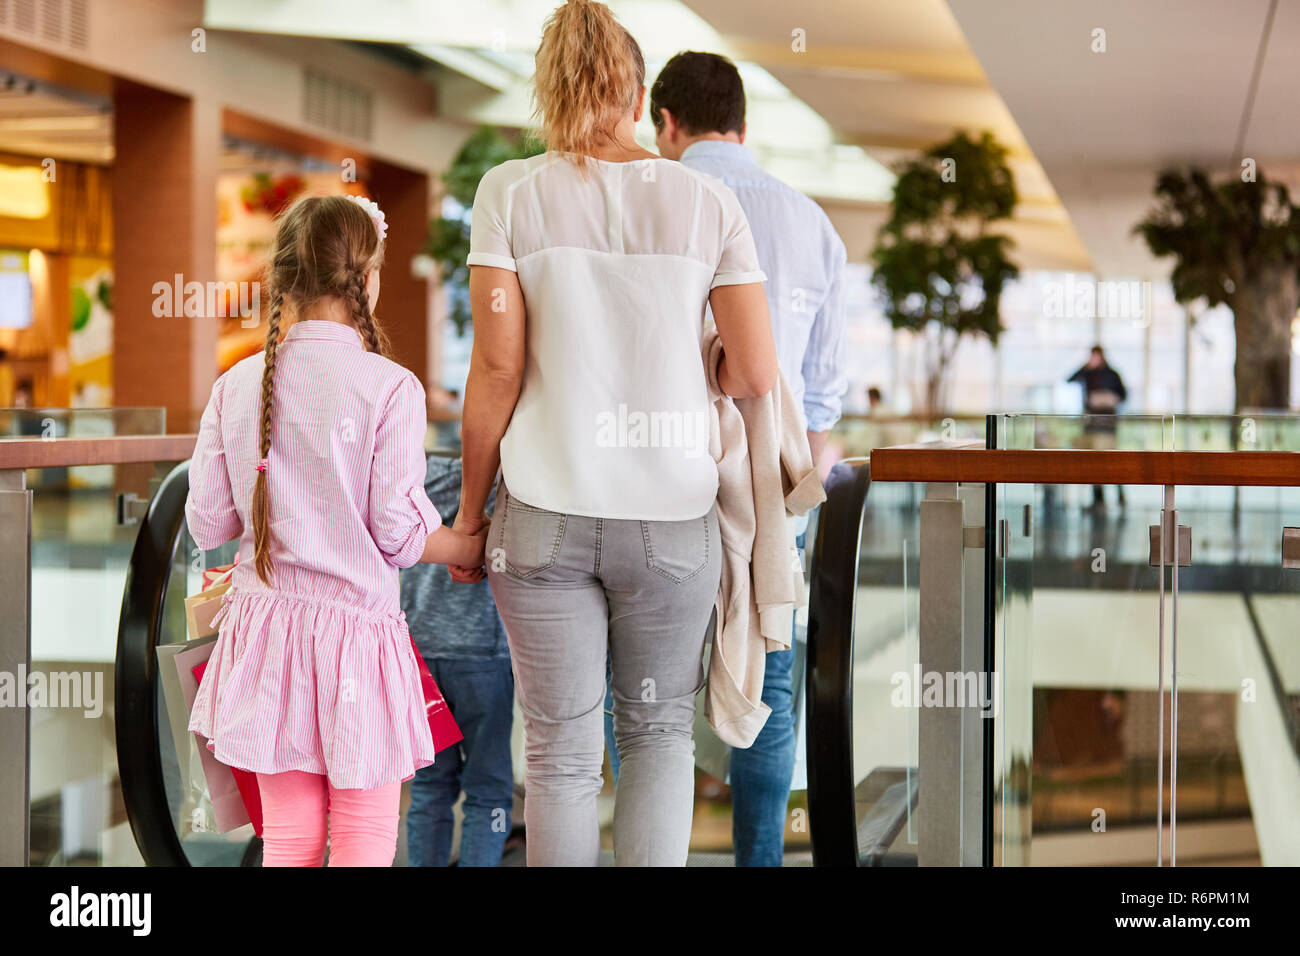 Family and children ride together escalator in shopping mall Stock Photo